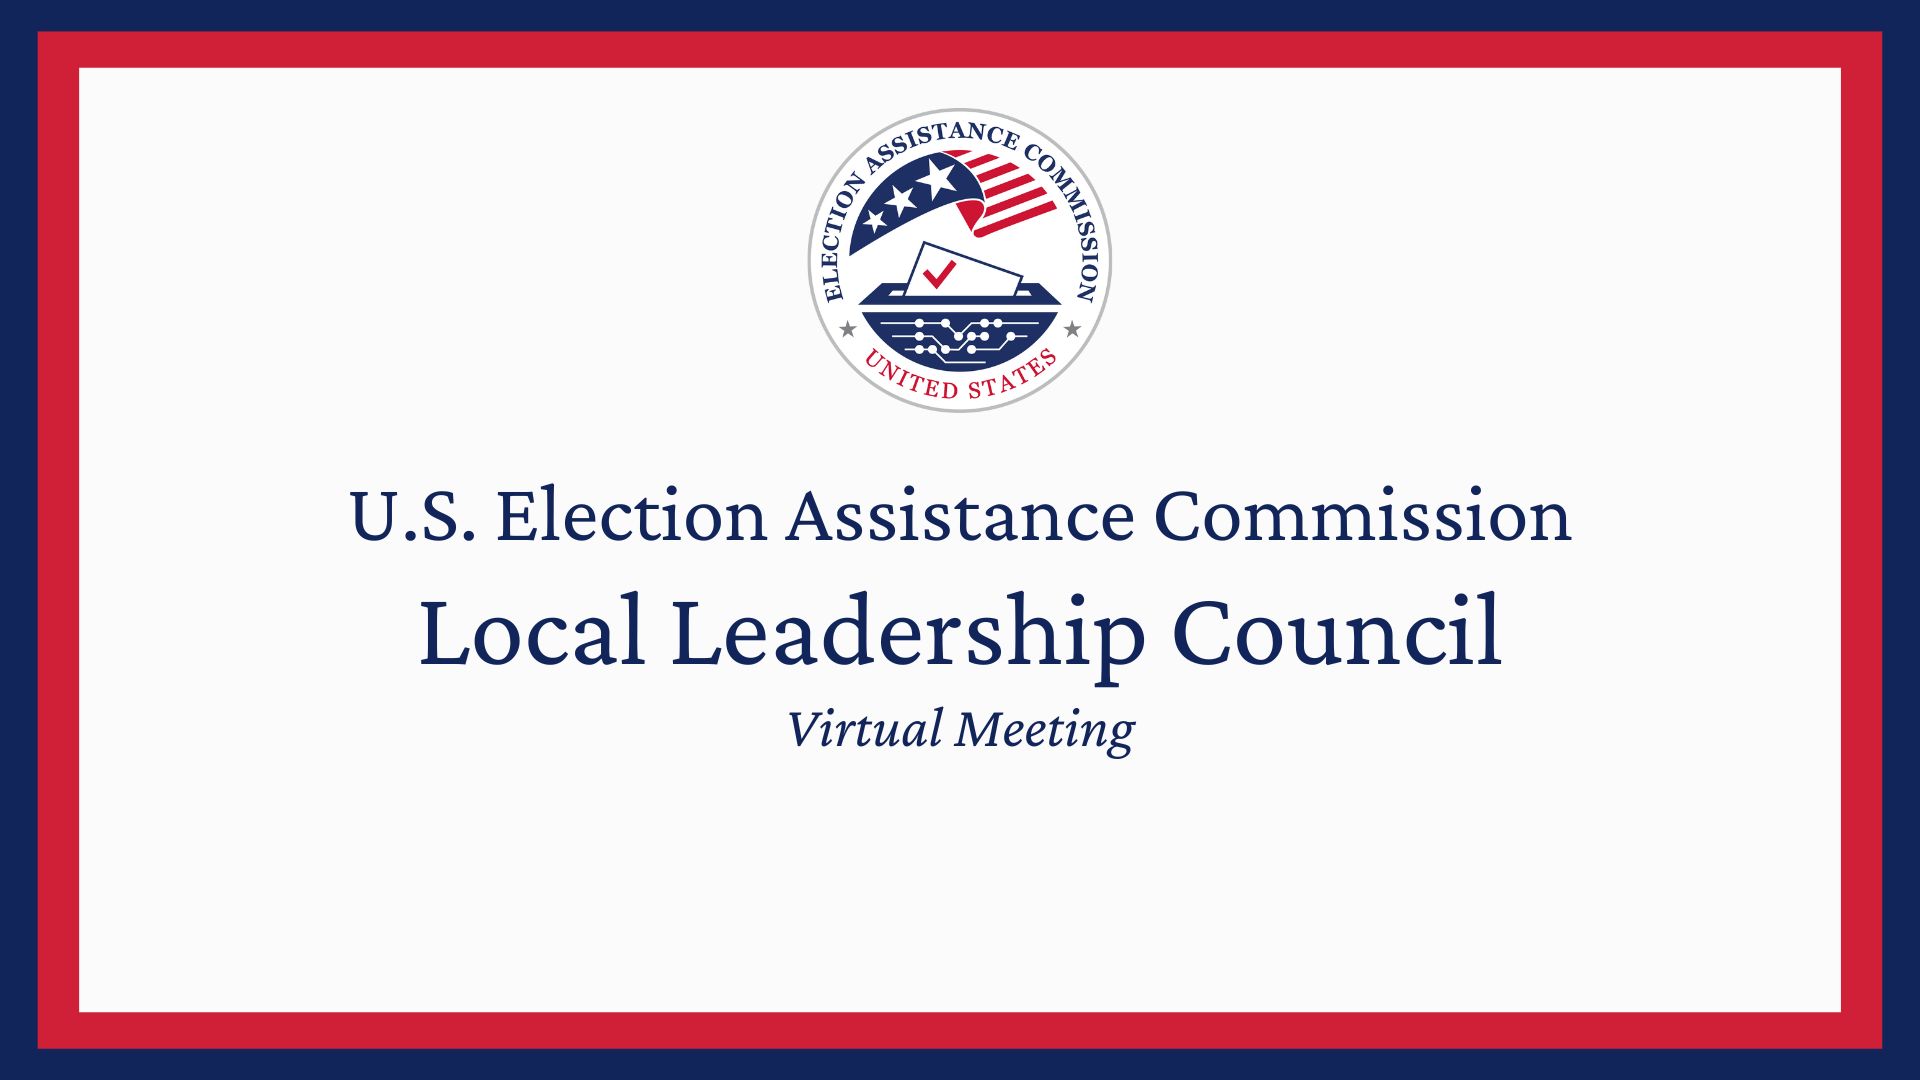 EAC seal at top. Text reads "U.S. Election Assistance Commission Local Leadership Council Virtual Meeting"